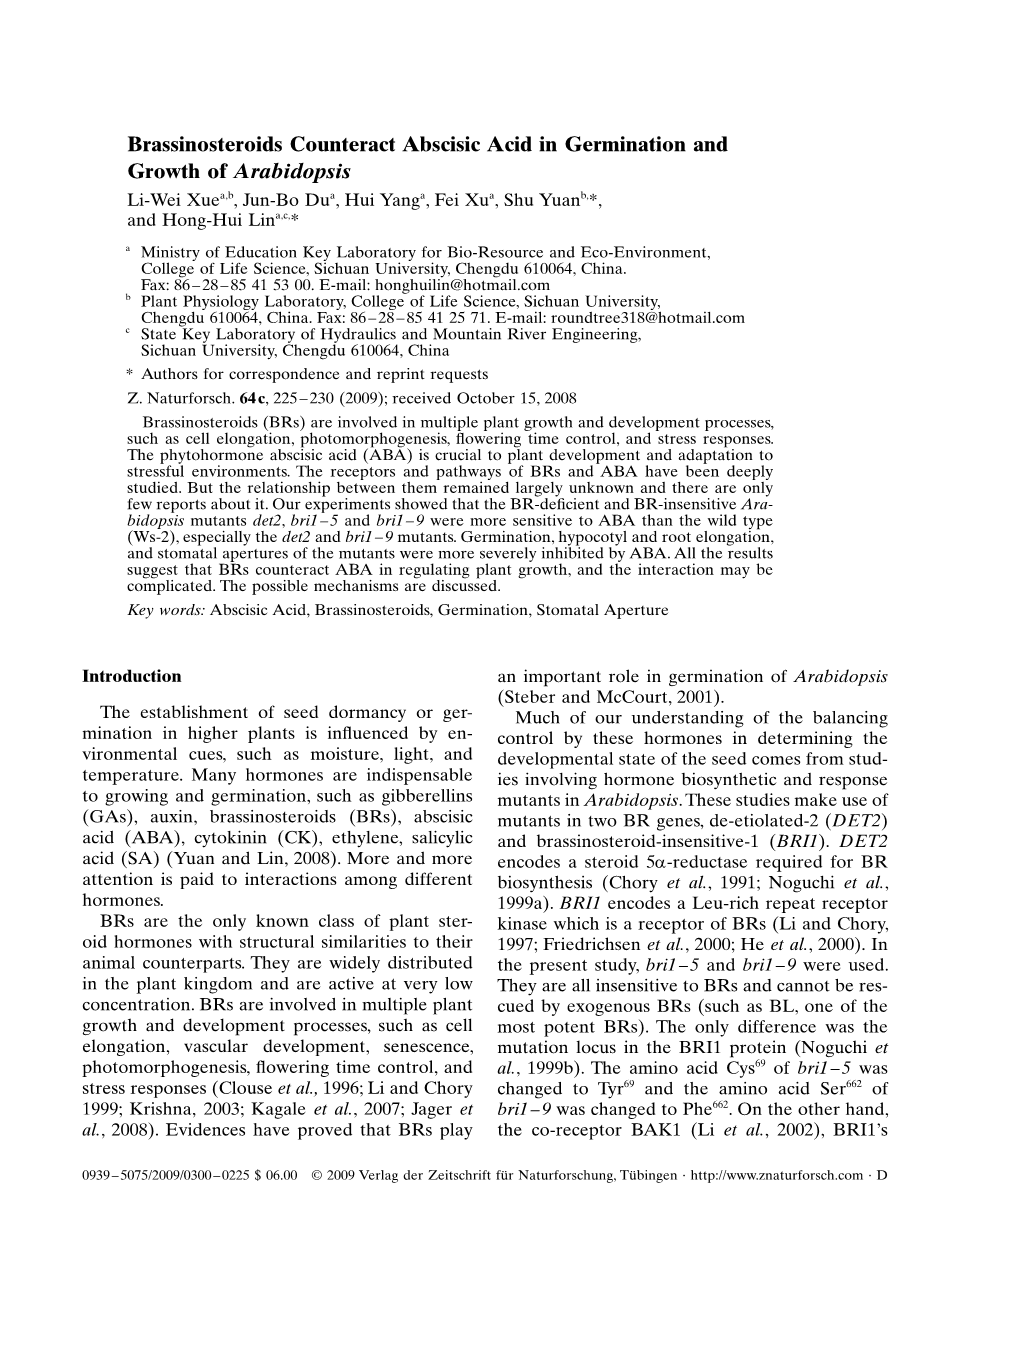 Brassinosteroids Counteract Abscisic Acid in Germination and Growth Of